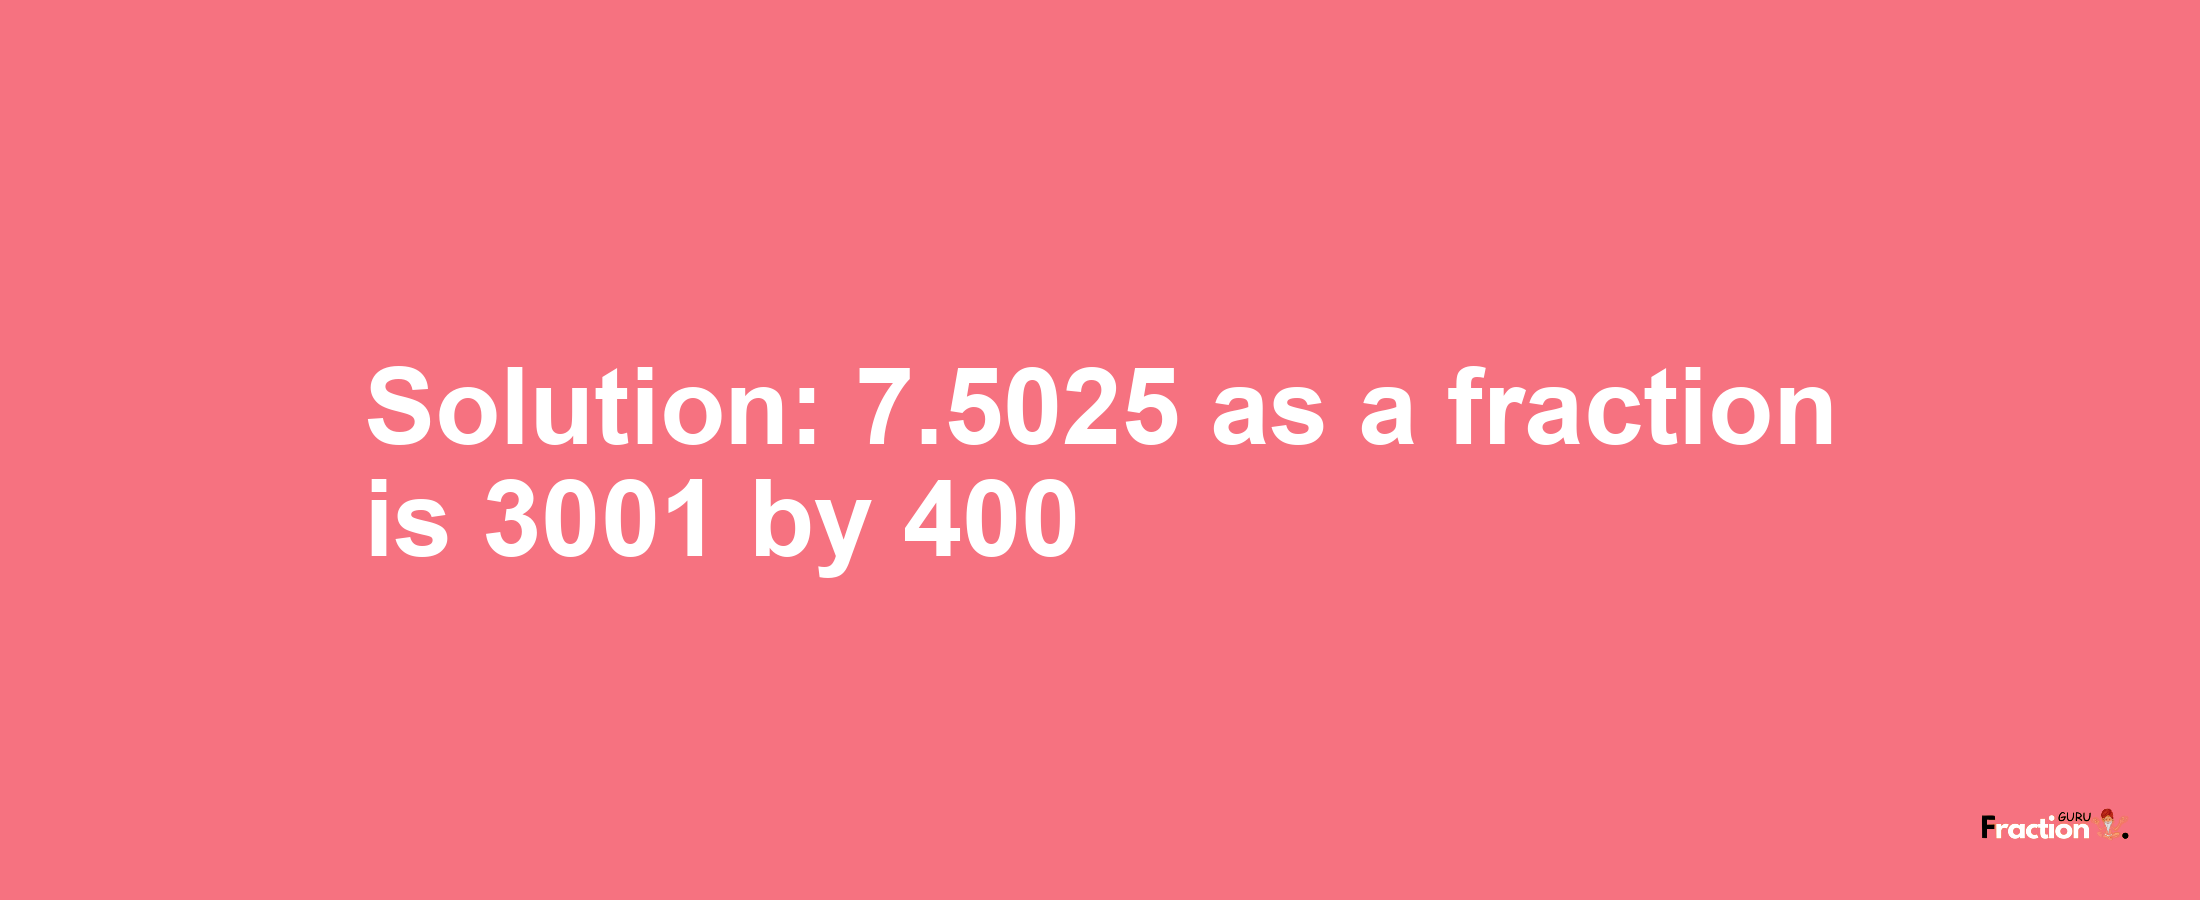 Solution:7.5025 as a fraction is 3001/400